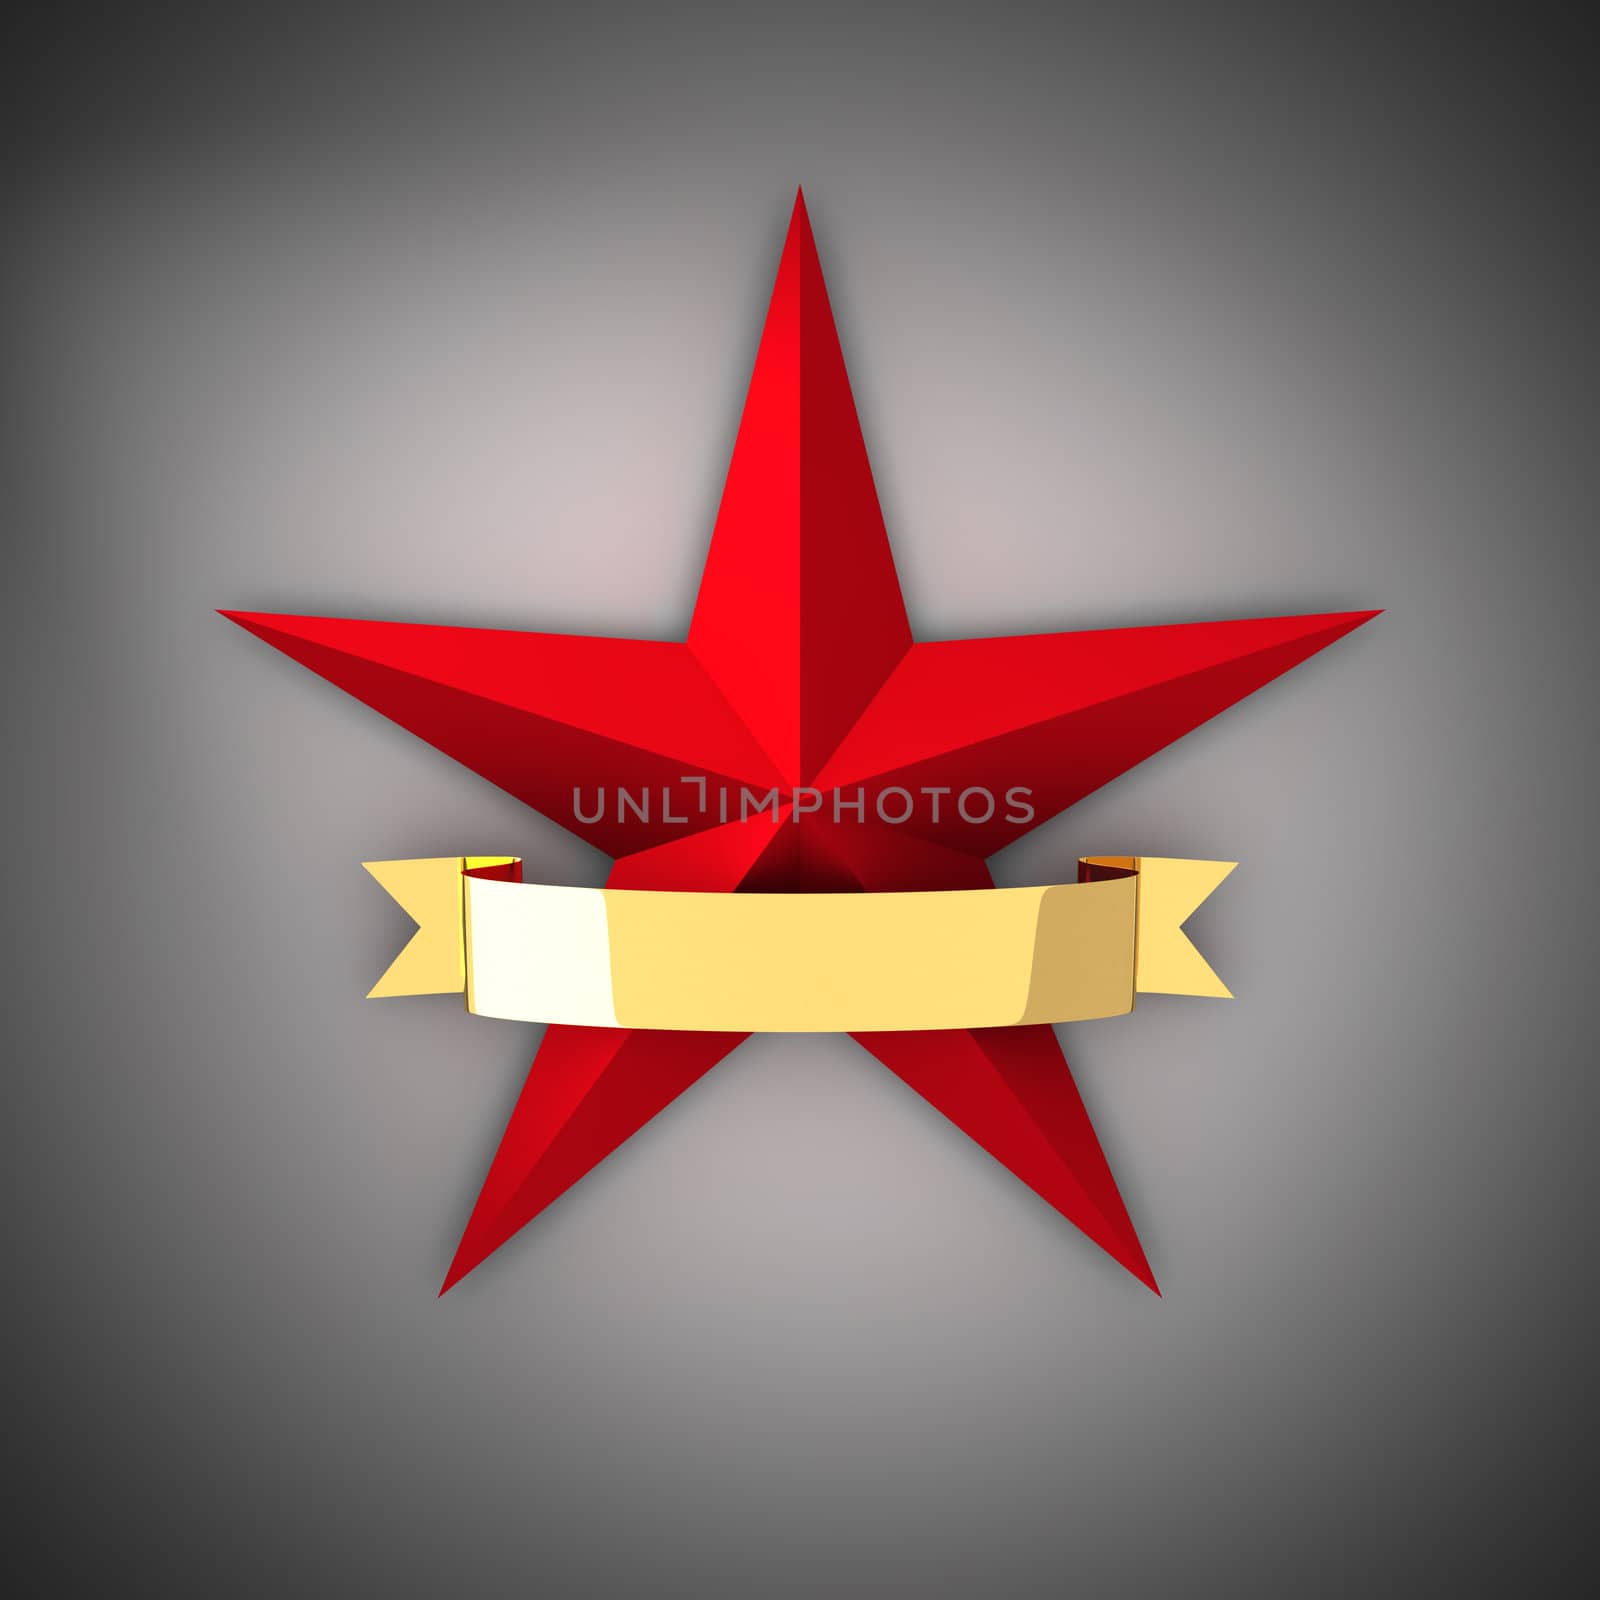 The big red star and gold ribbon